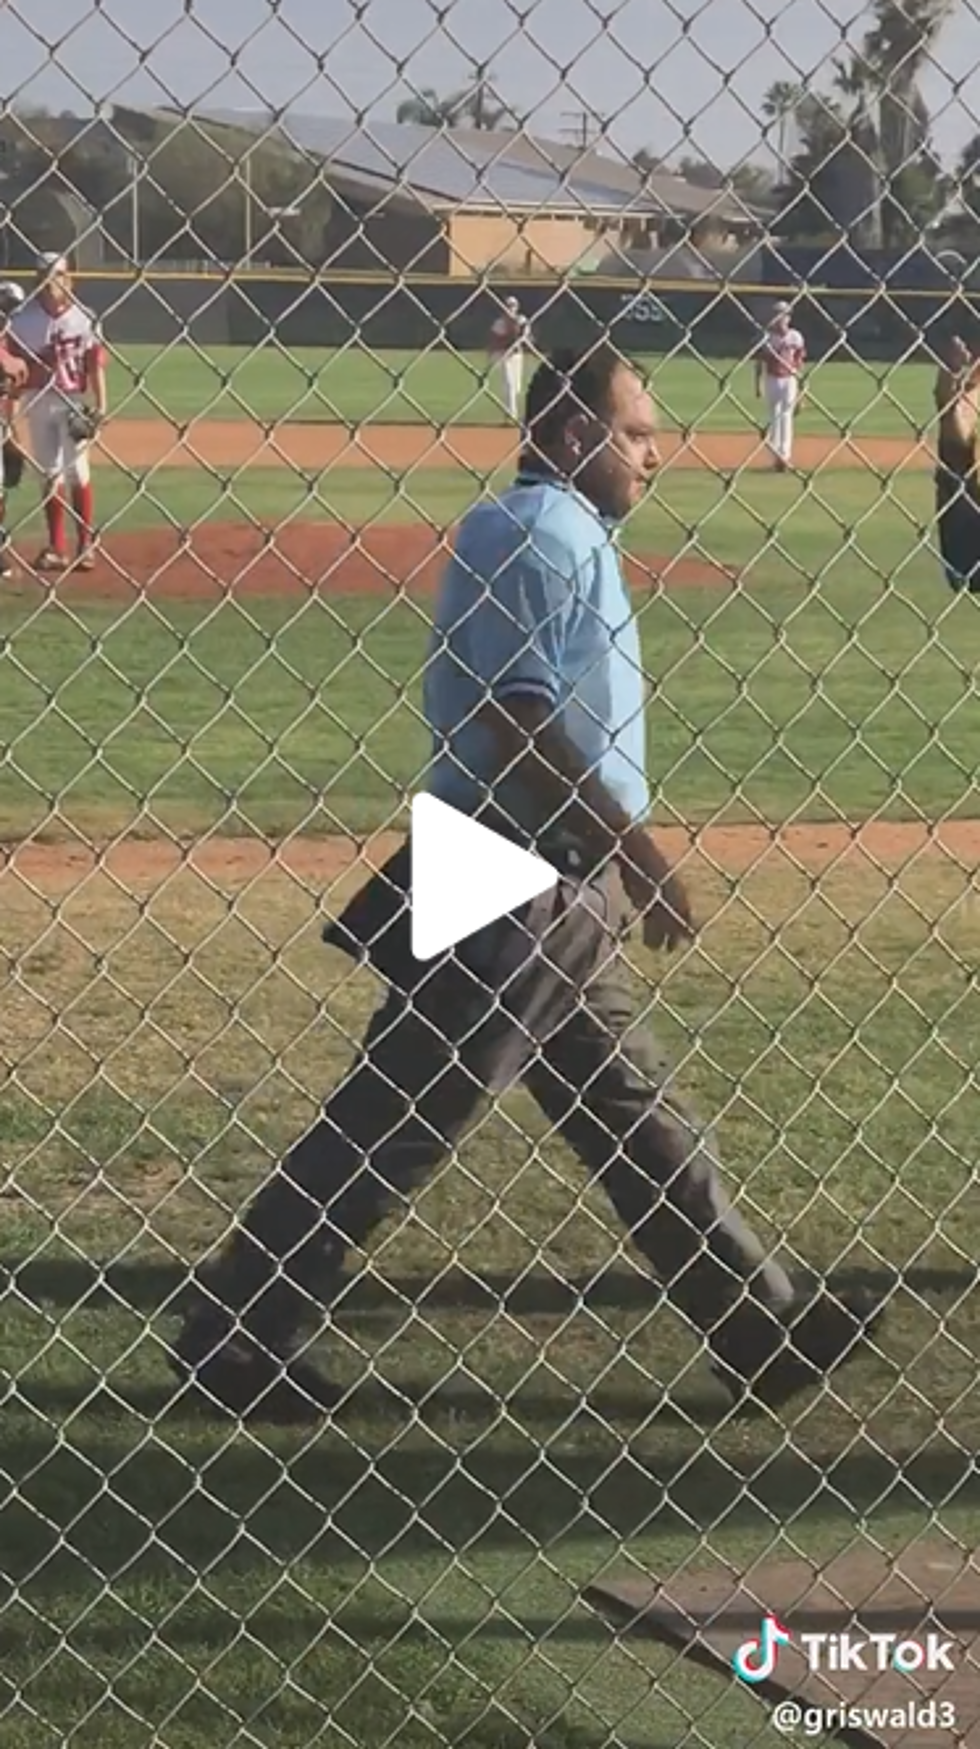 Umpire Leaves Baseball Game Due To Non-Stop Chatter From Parents